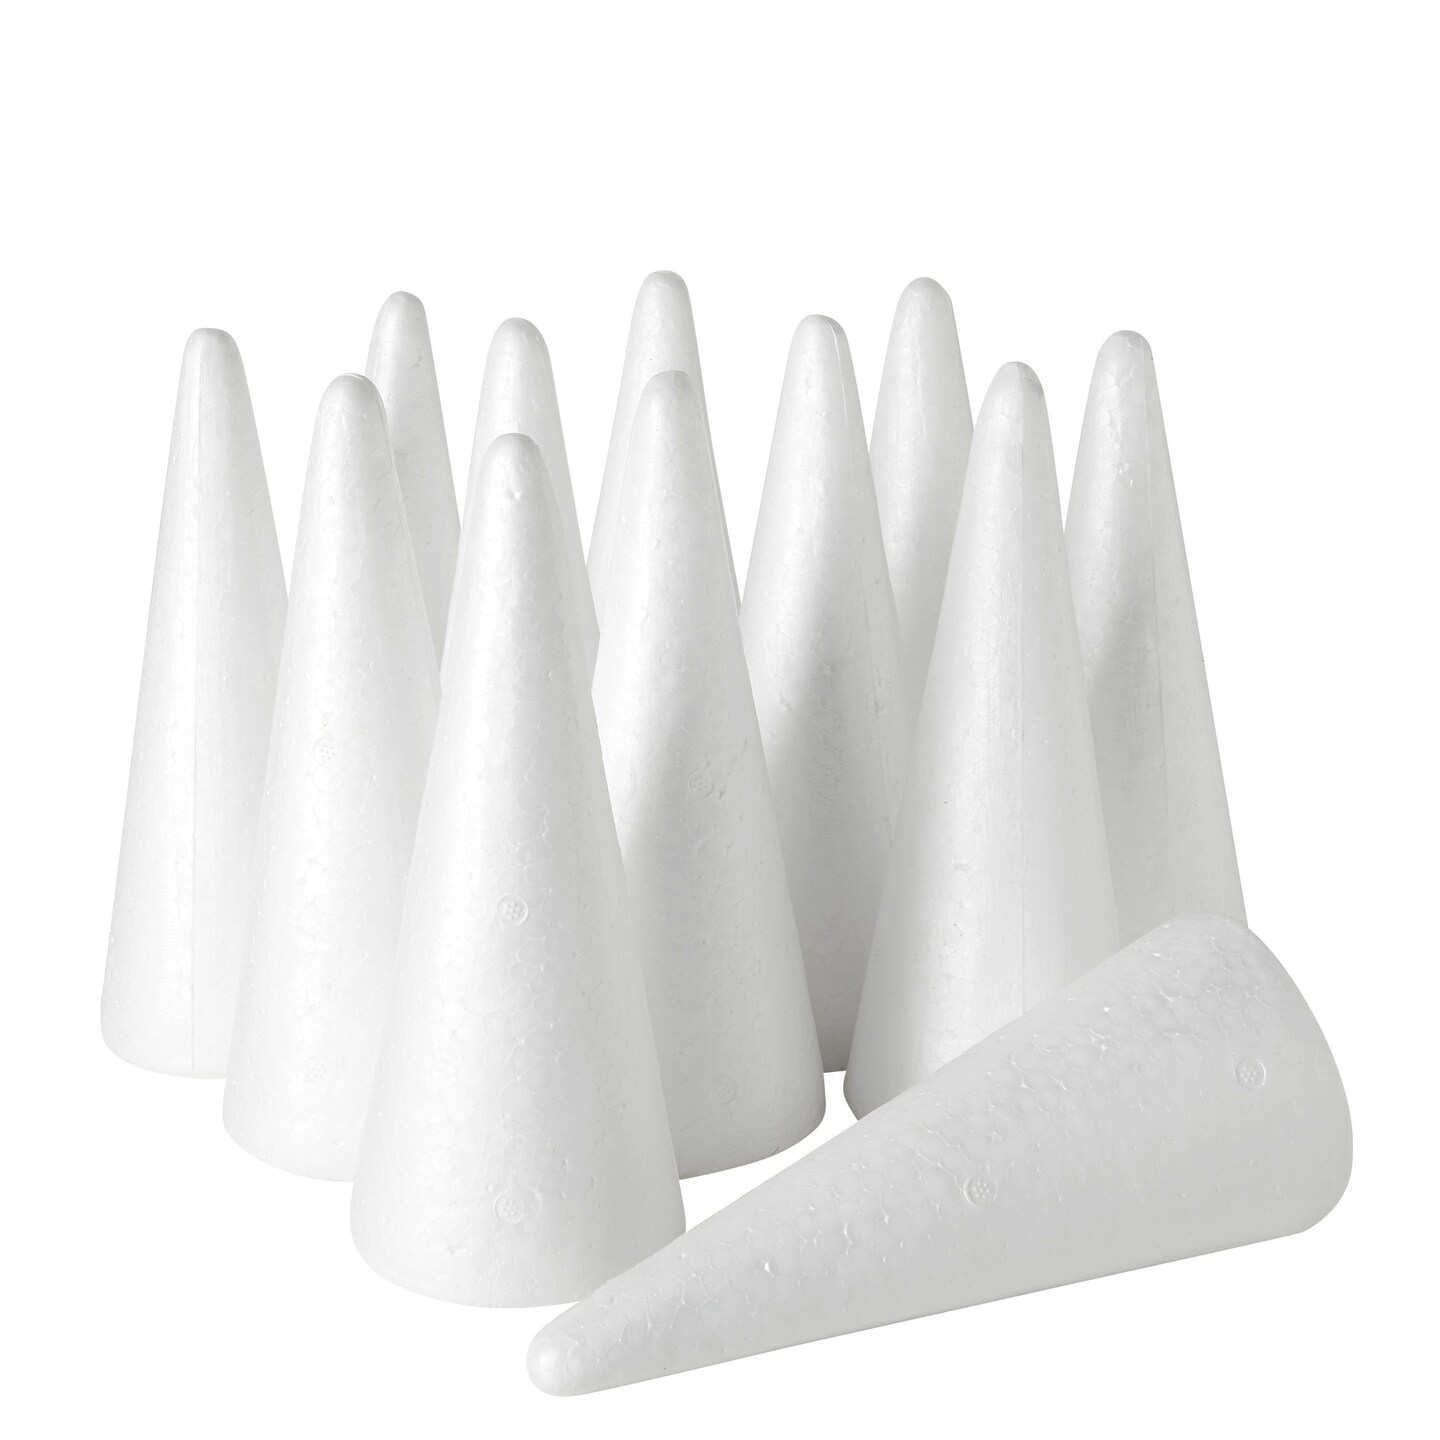 12 Pack Craft Foam - Foam Cones for Crafts, Trees, Holiday Gnomes